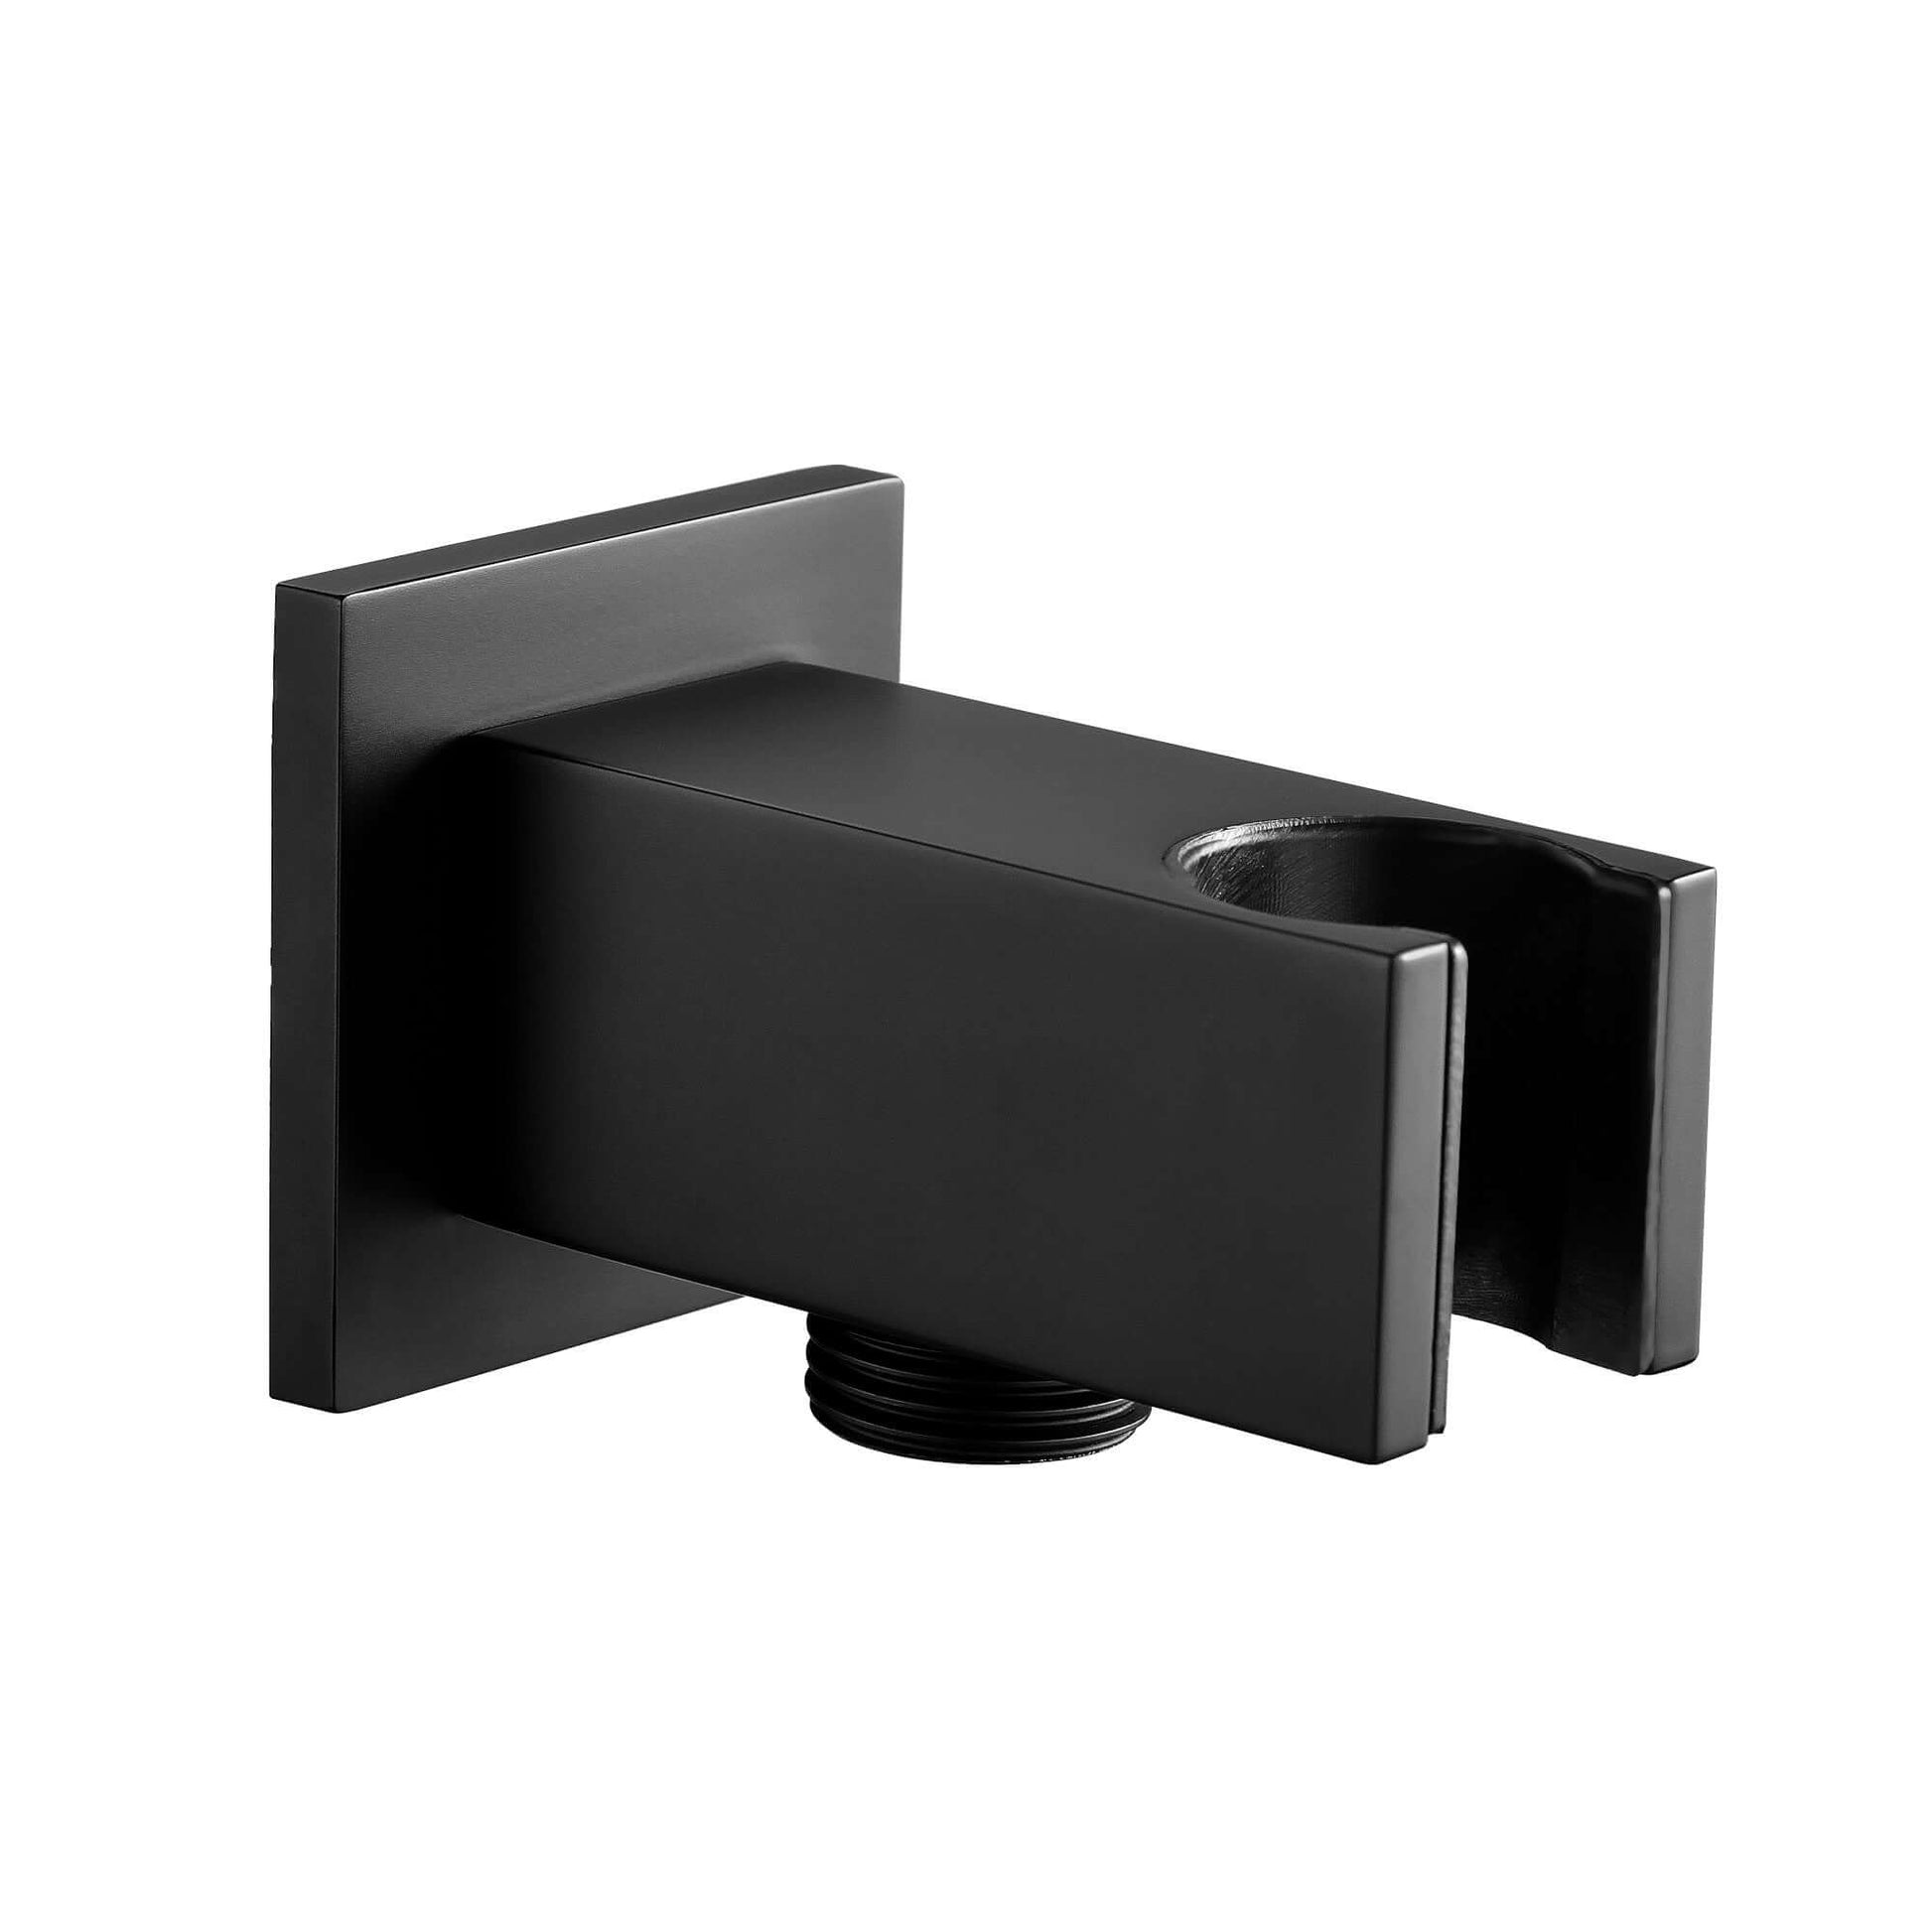 Contemporary Square 3 Function Hand Shower Kit Incl. Hose And Wall Bracket With Outlet - Black - Showers